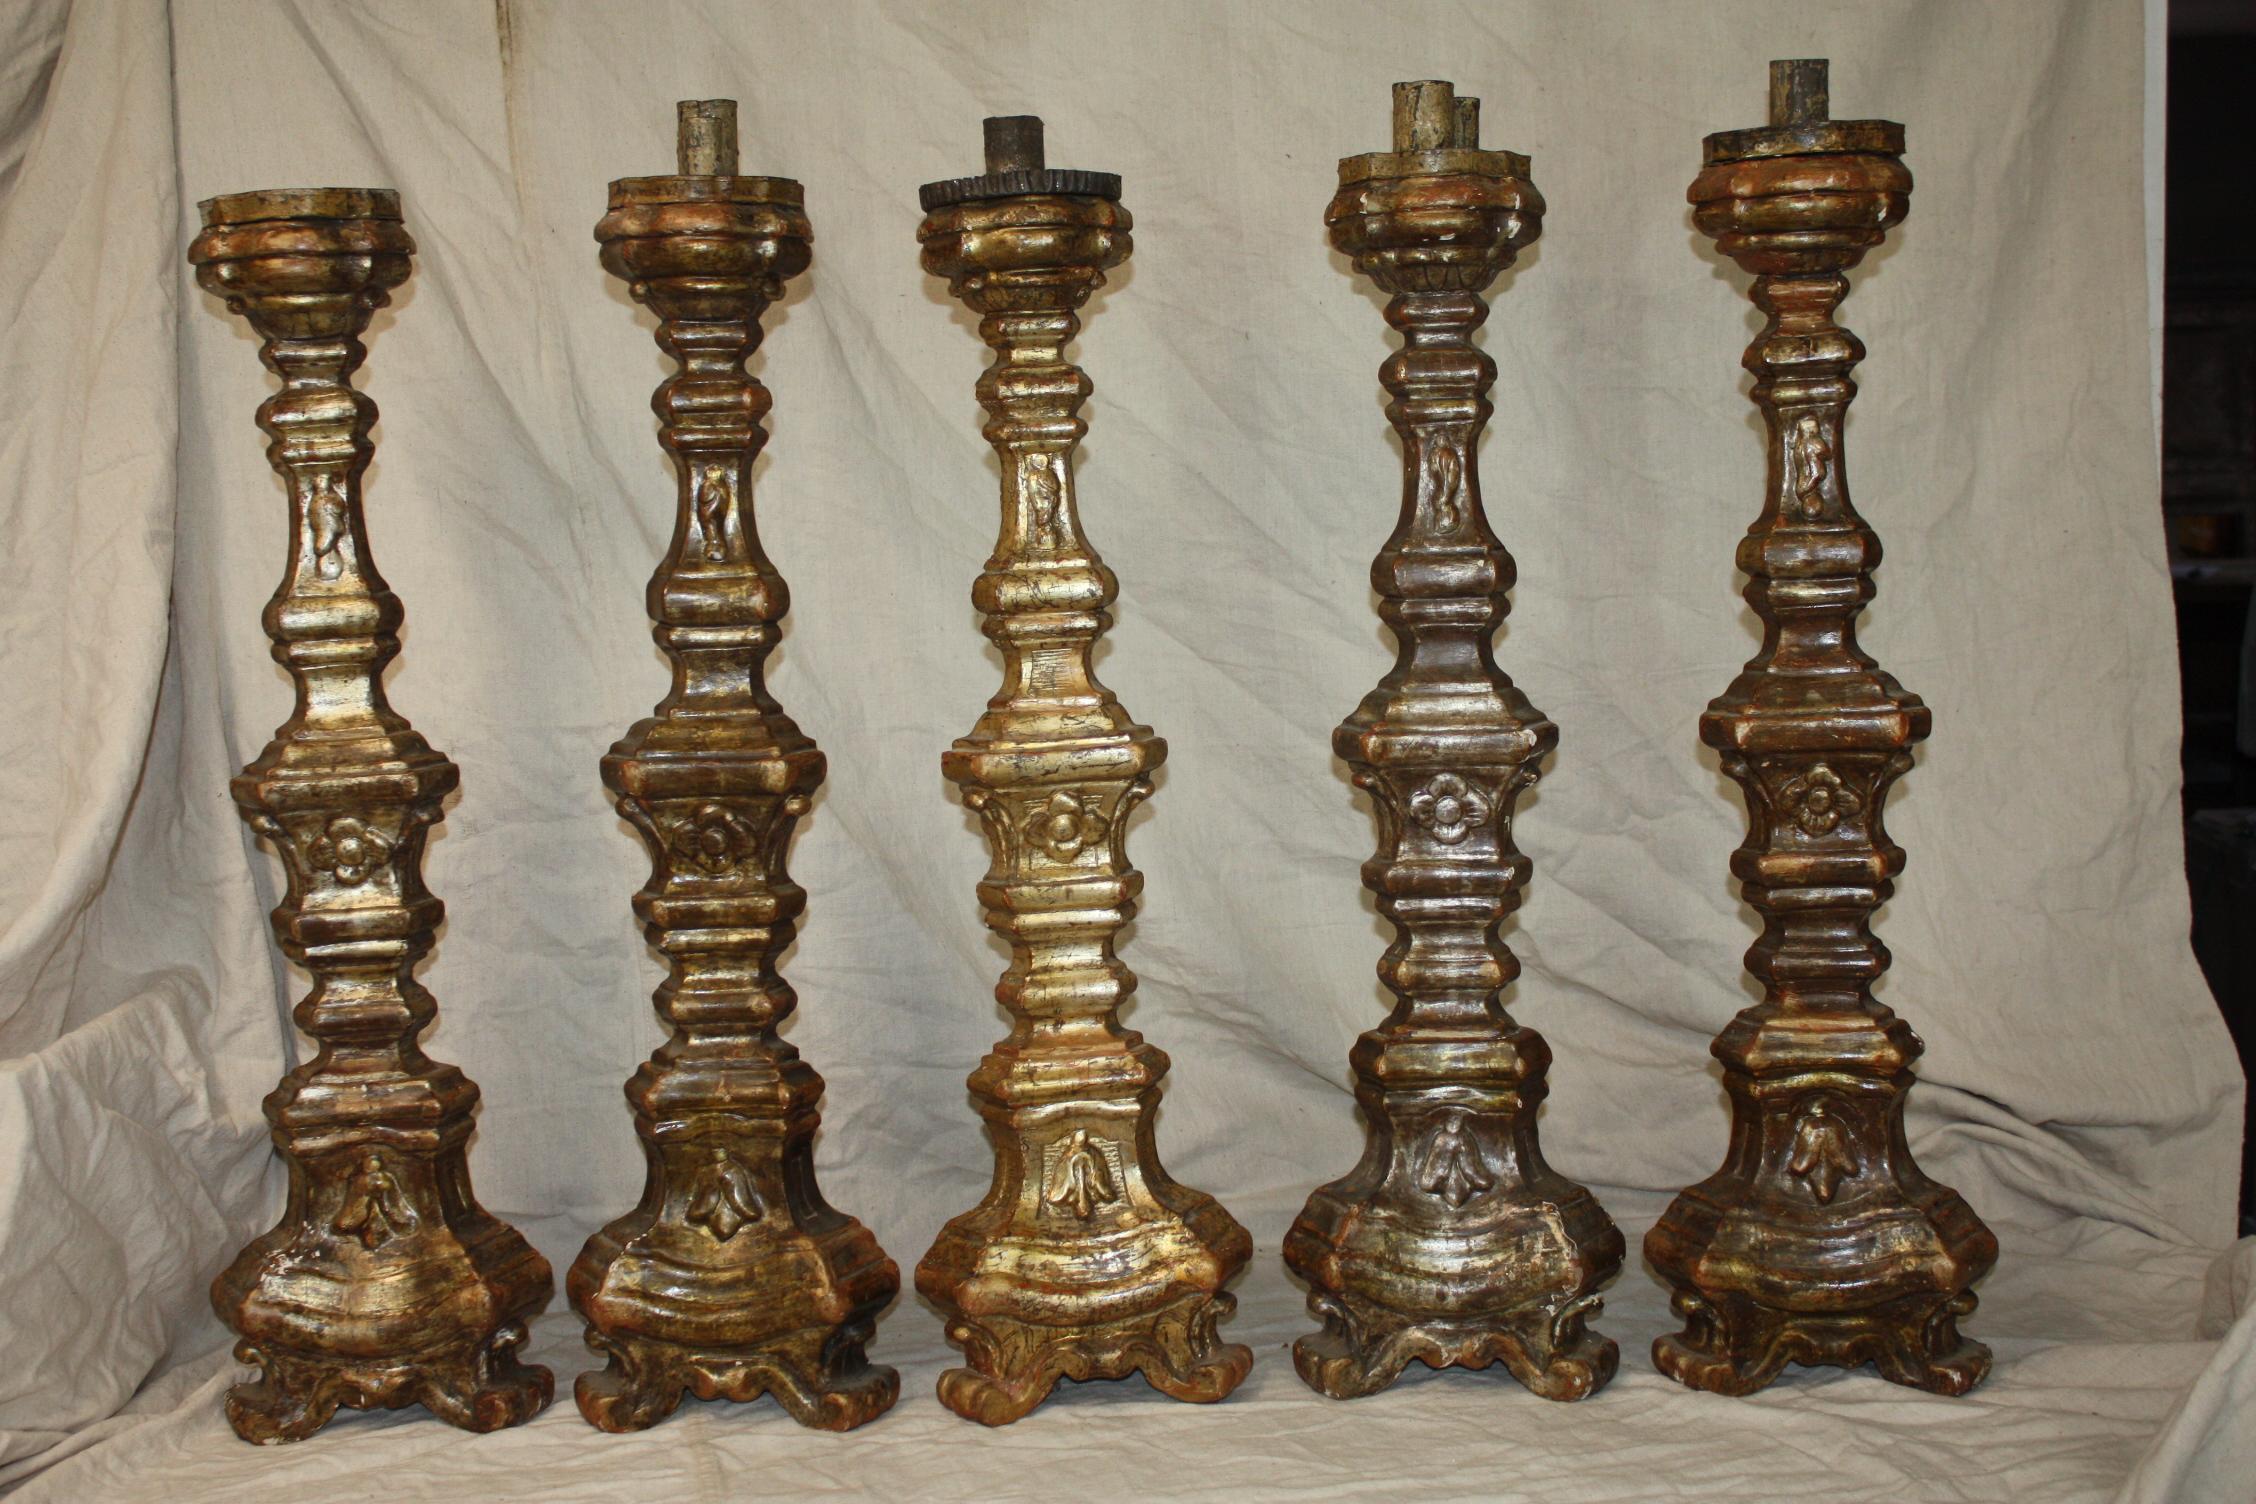 I bought a set of 5 18th century Italian candle sticks. They match in shape but have slight variations in the tone of the gilding. They are similarly carved on all three sides but have a definitive front that is gilded. The price is for an